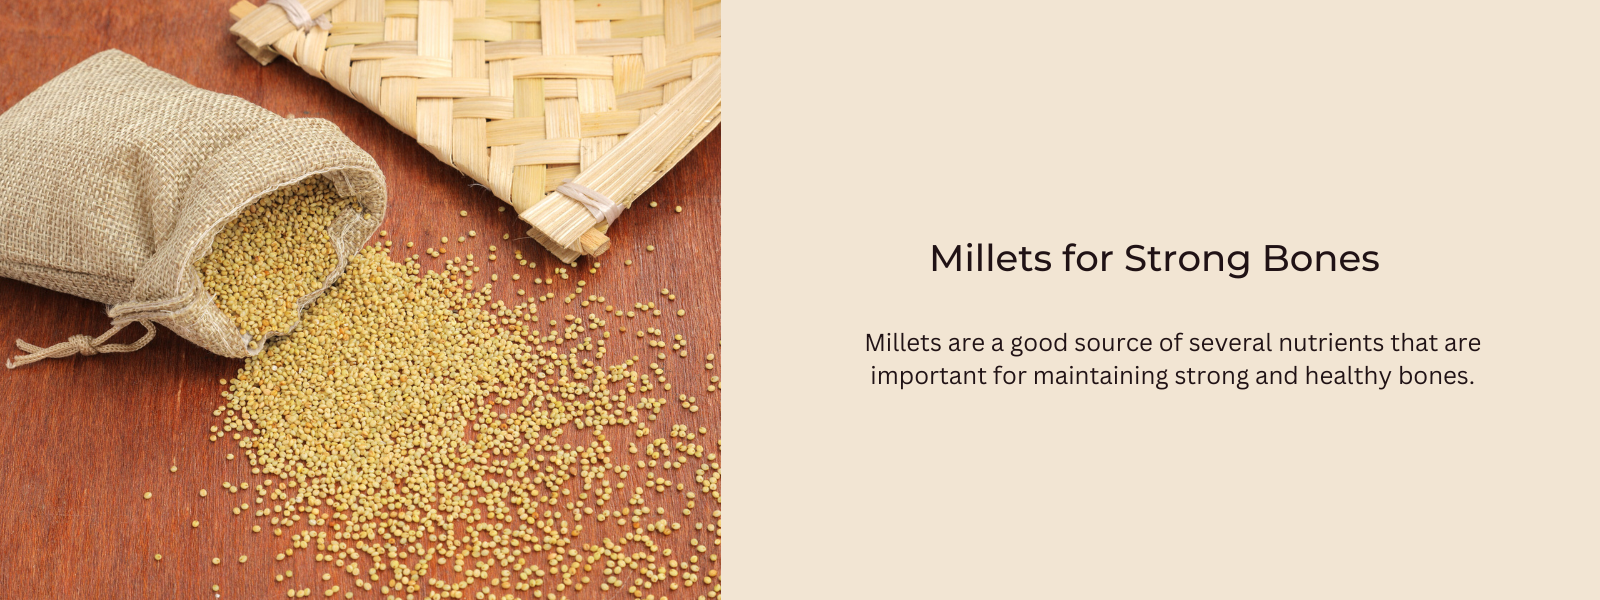 Millets for Strong Bones: The Calcium Connection